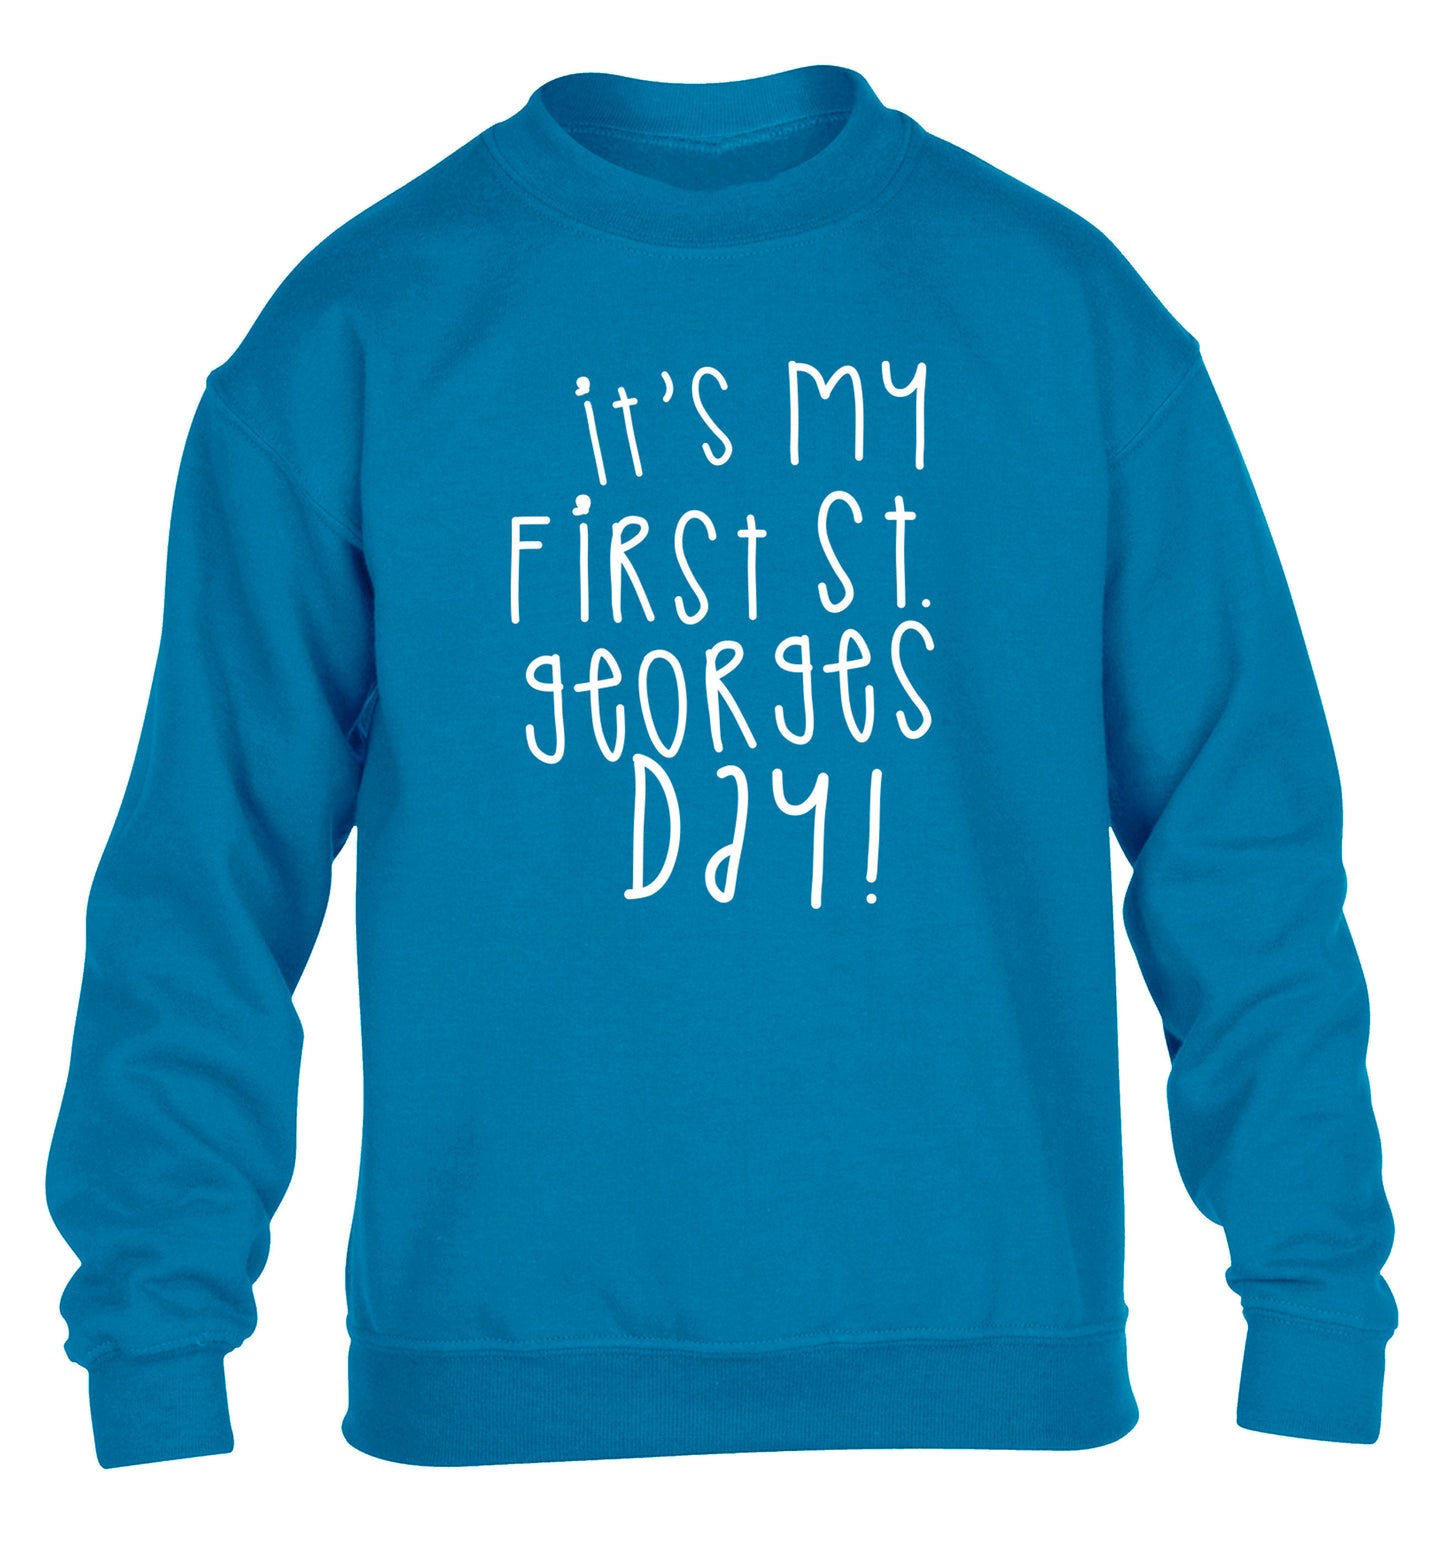 It's my first St Georges day children's blue sweater 12-14 Years